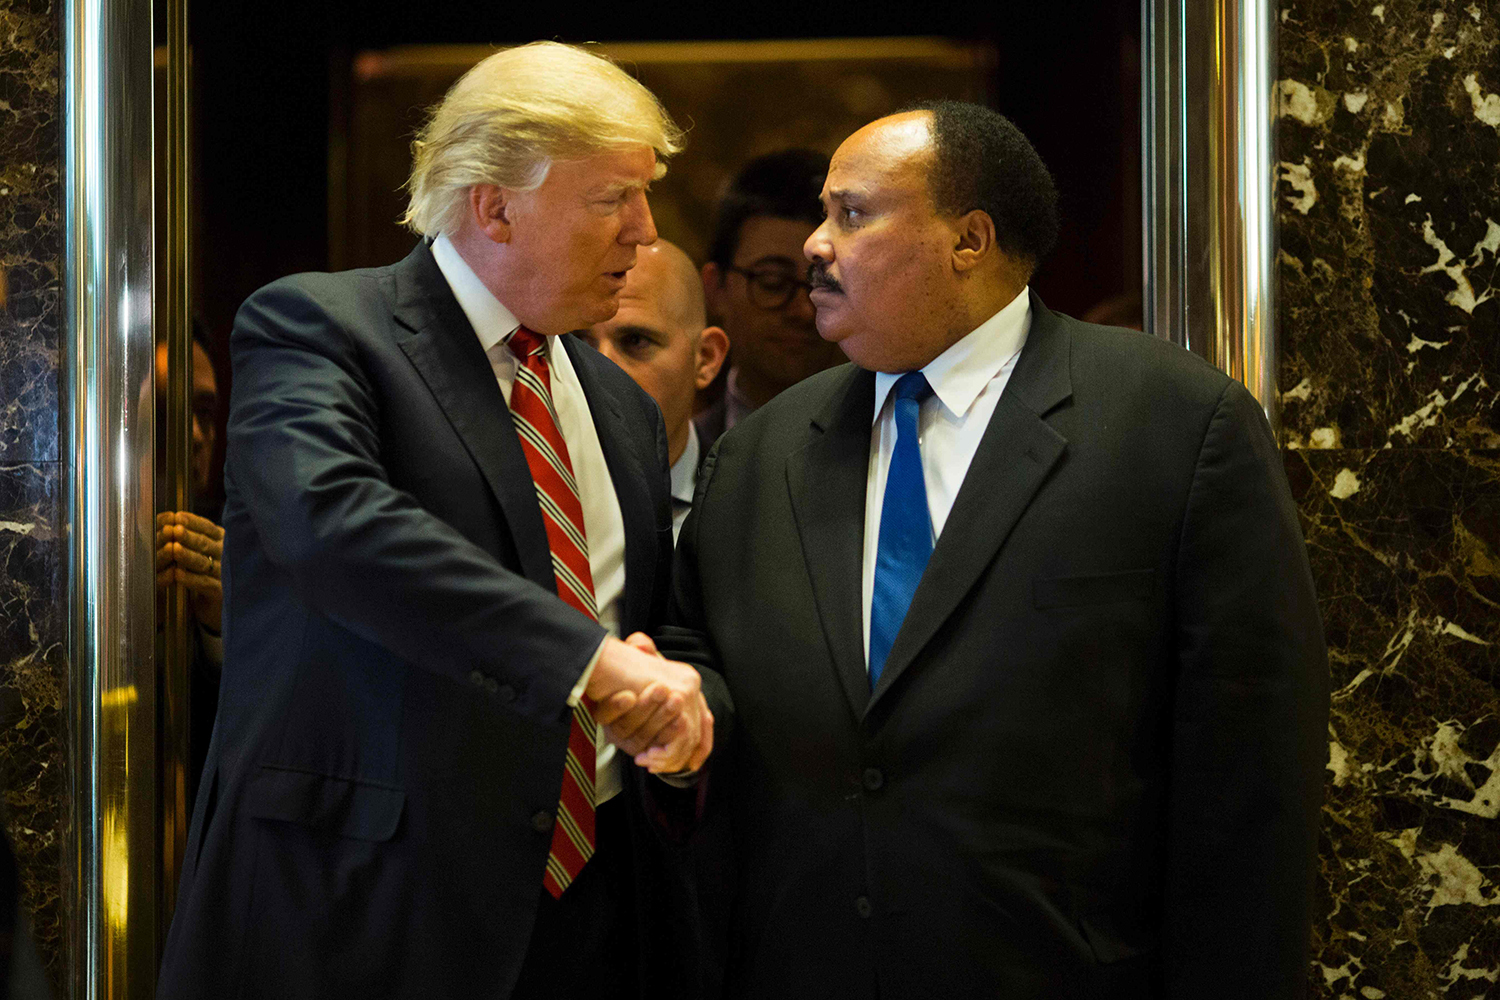 TOPSHOT - US President-elect Donald Trump shakes hands with Martin Luther King III after meeting at Trump Tower in New York City on January 16, 2017. The eldest son of American civil rights icon Martin Luther King Jr. met with US President-elect on the national holiday observed in remembrance of his late father. / AFP PHOTO / DOMINICK REUTER / TT / kod 444